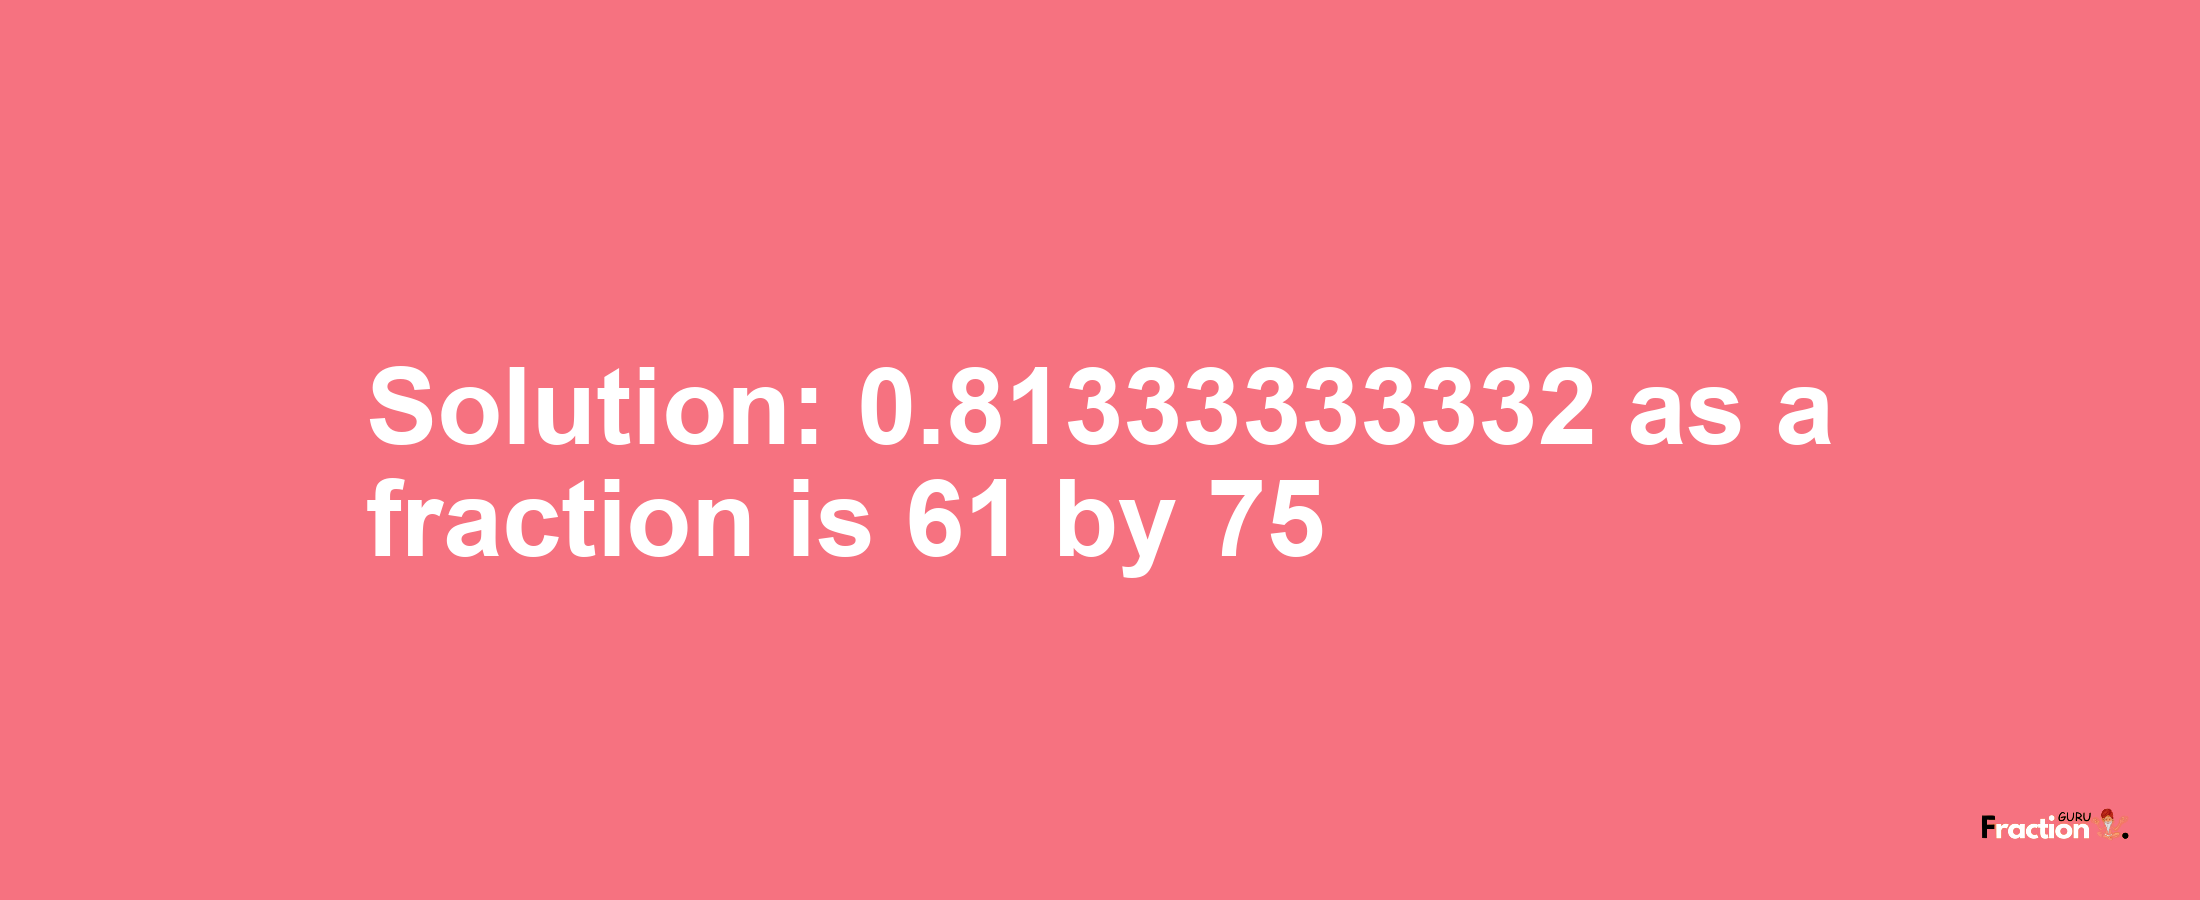 Solution:0.81333333332 as a fraction is 61/75